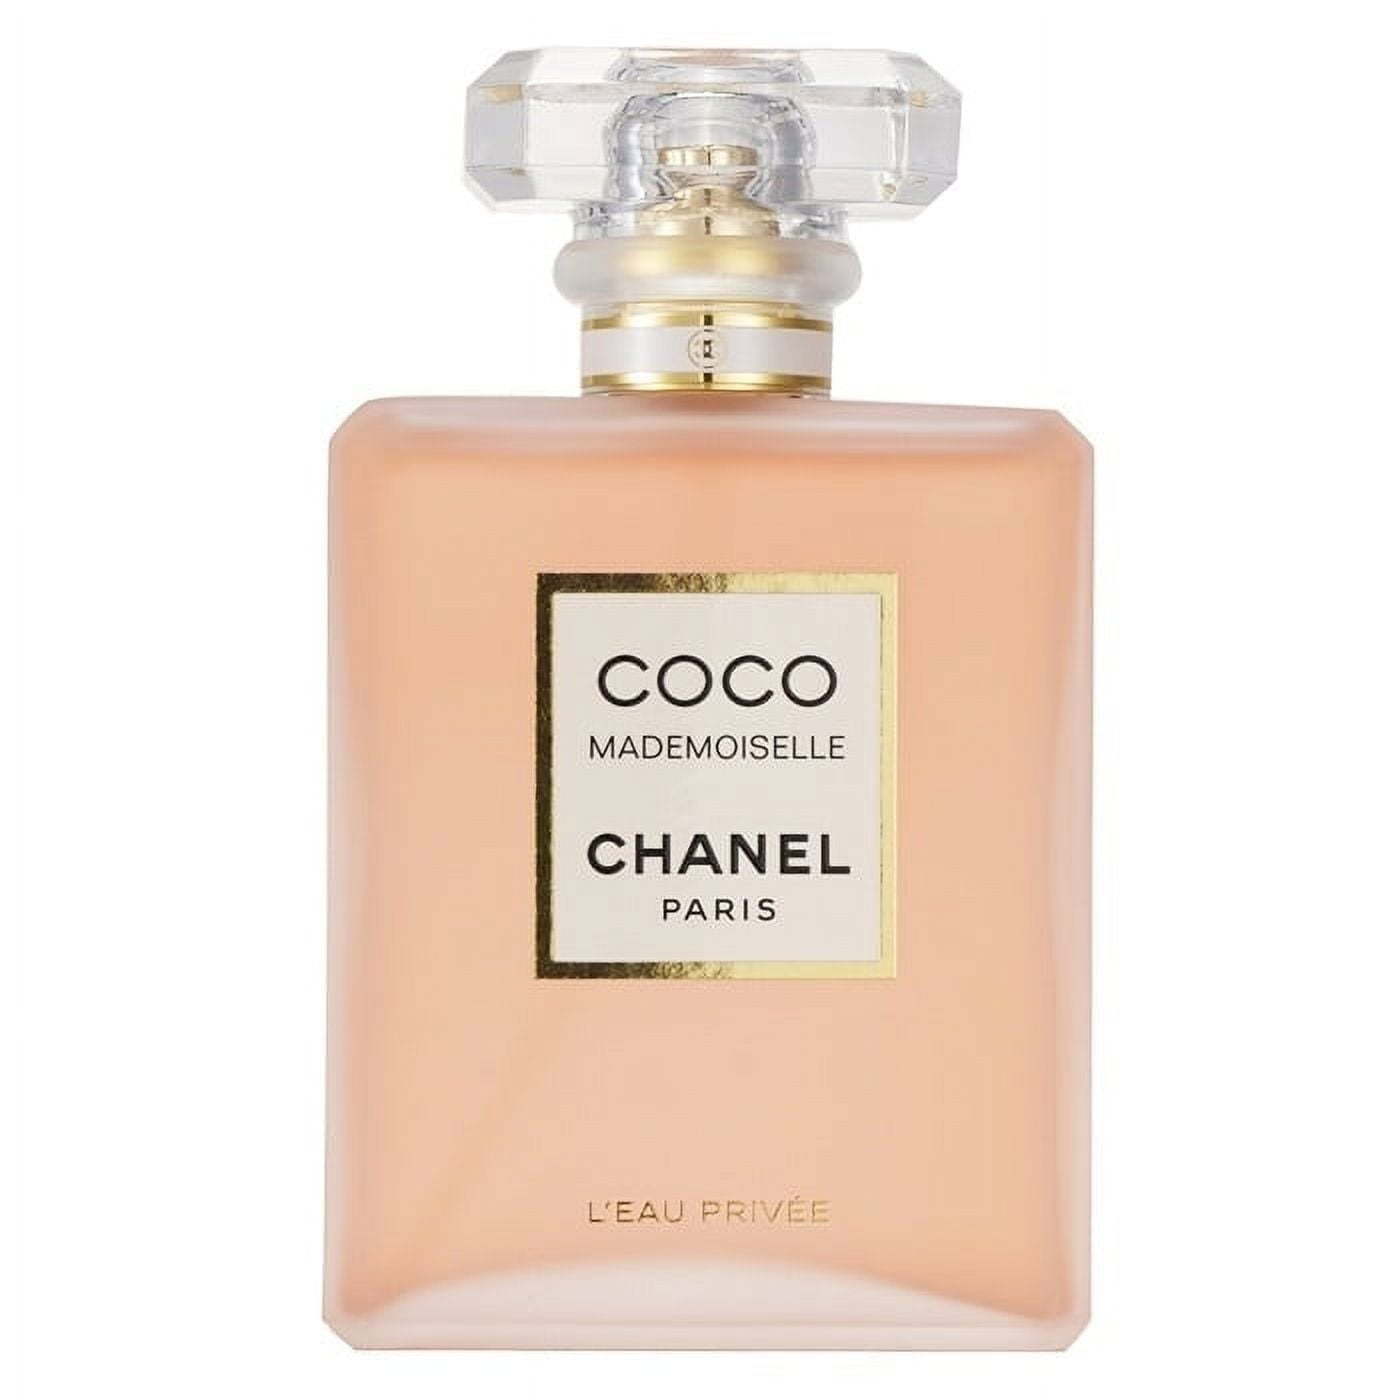 COCO MADEMOISELLE L'EAU PRIVÉE - NIGHT FRAGRANCE by CHANEL – The Fragrance  Shop Inc